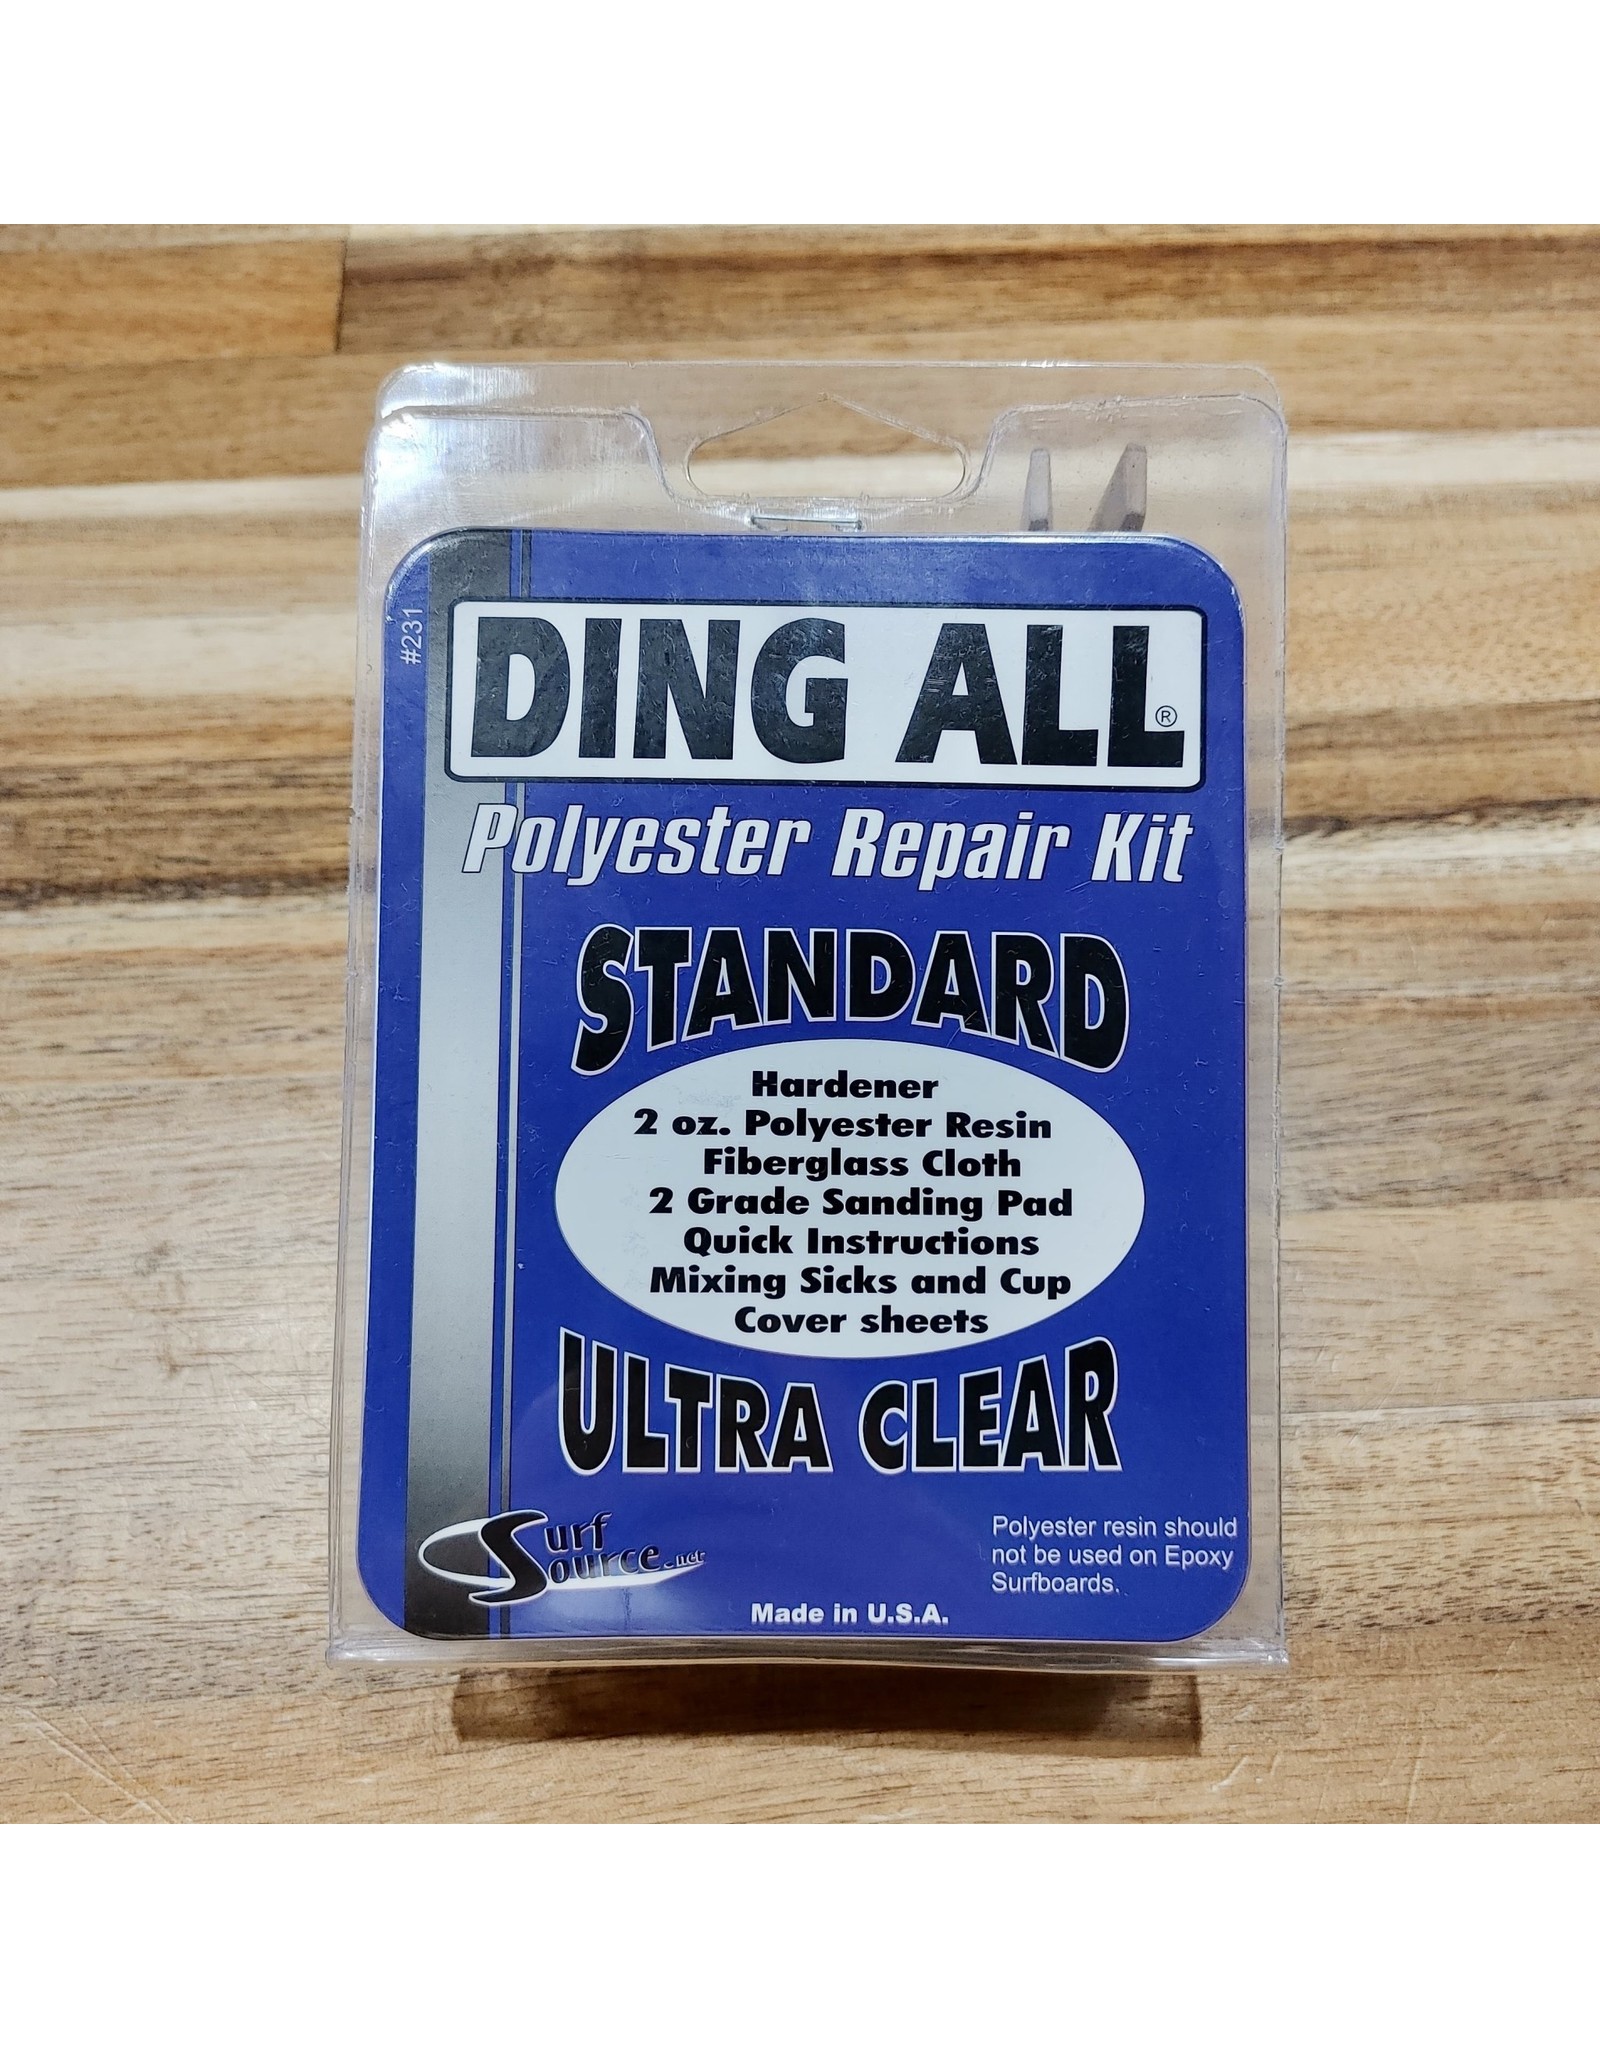 Ding All Ding All Polyester Repair Kit Standard Ultra Clear